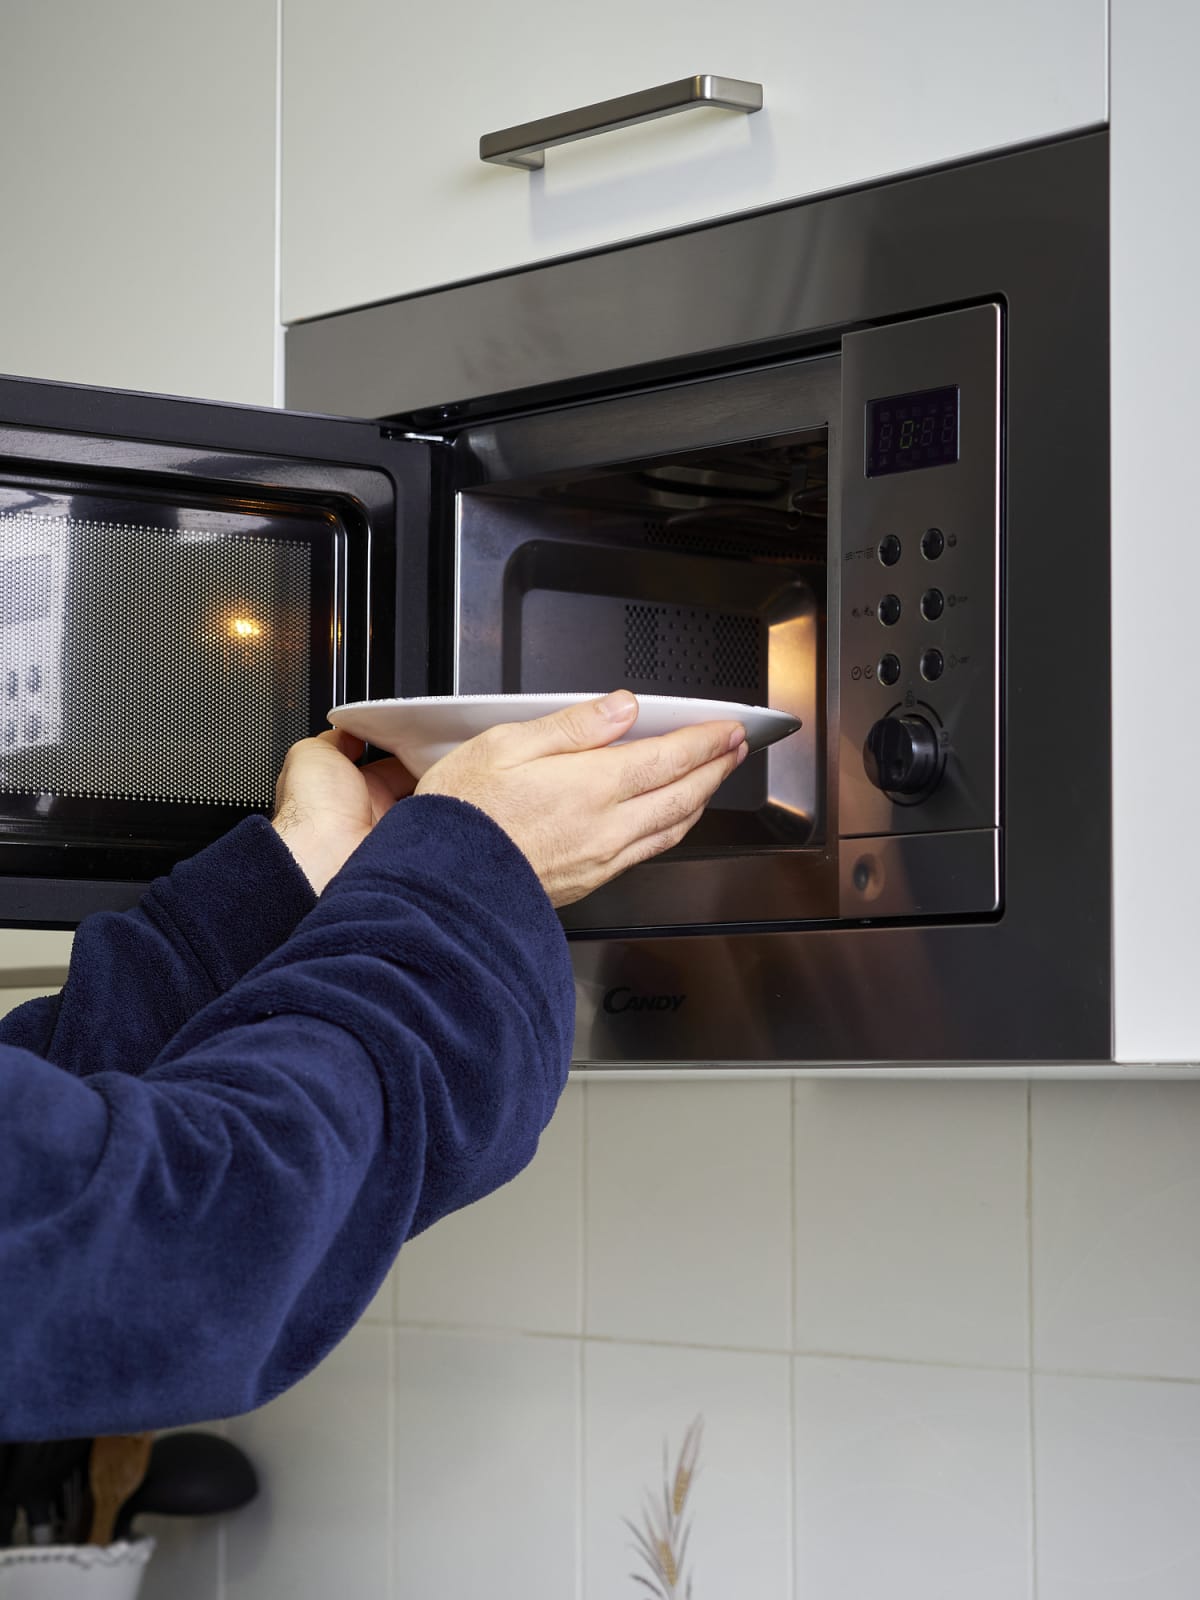 Hands putting a plate into a microwave